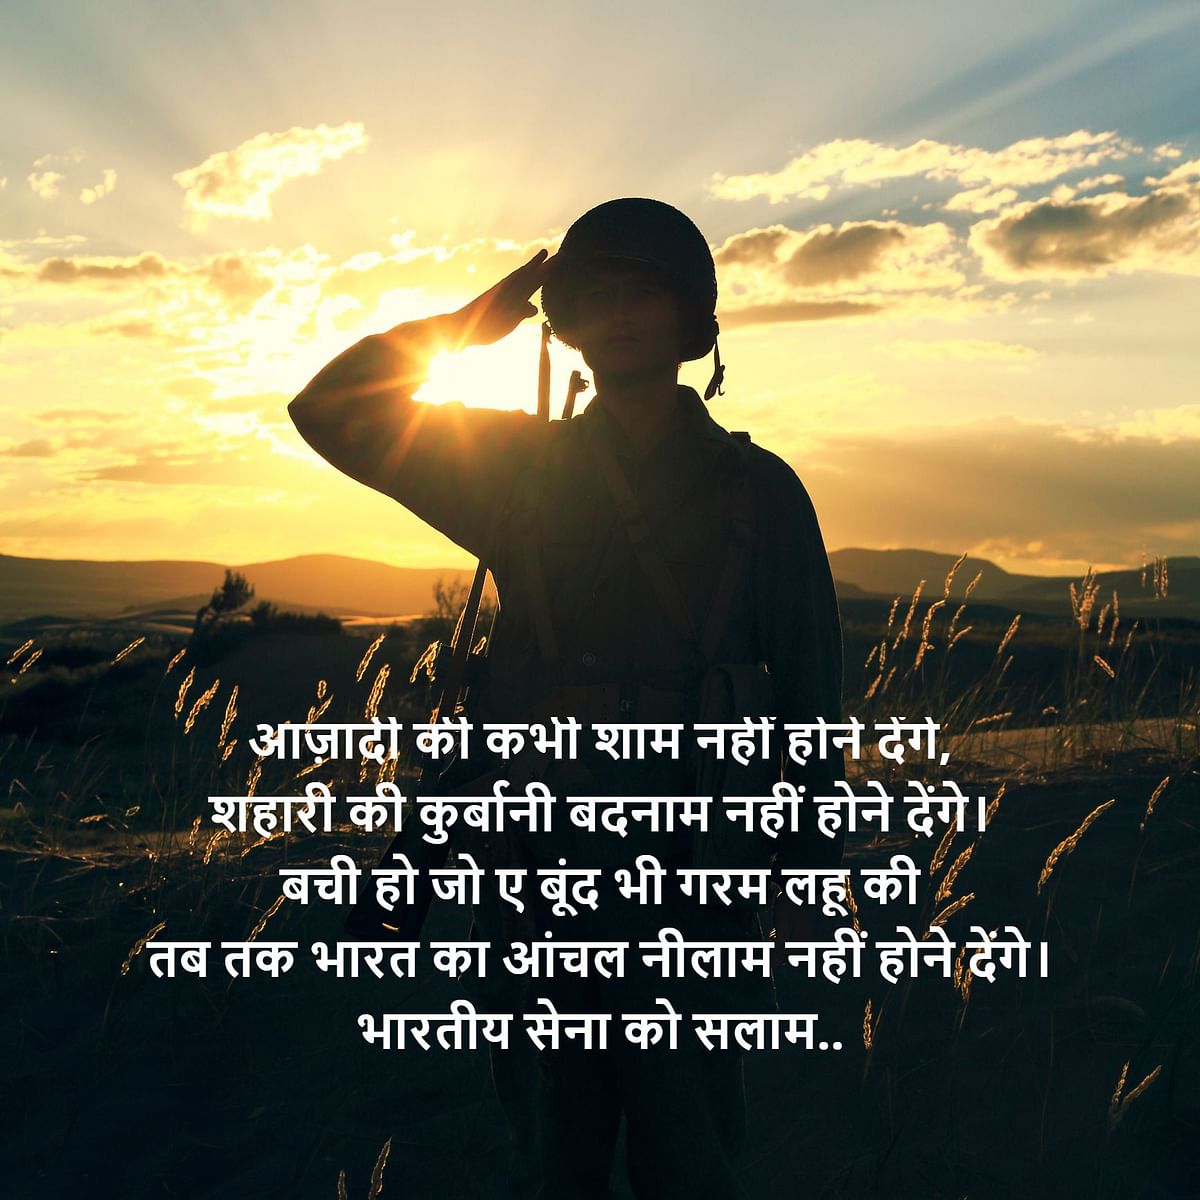 Here are some wishes, images and quotes on the occasion of Indian Army Day.